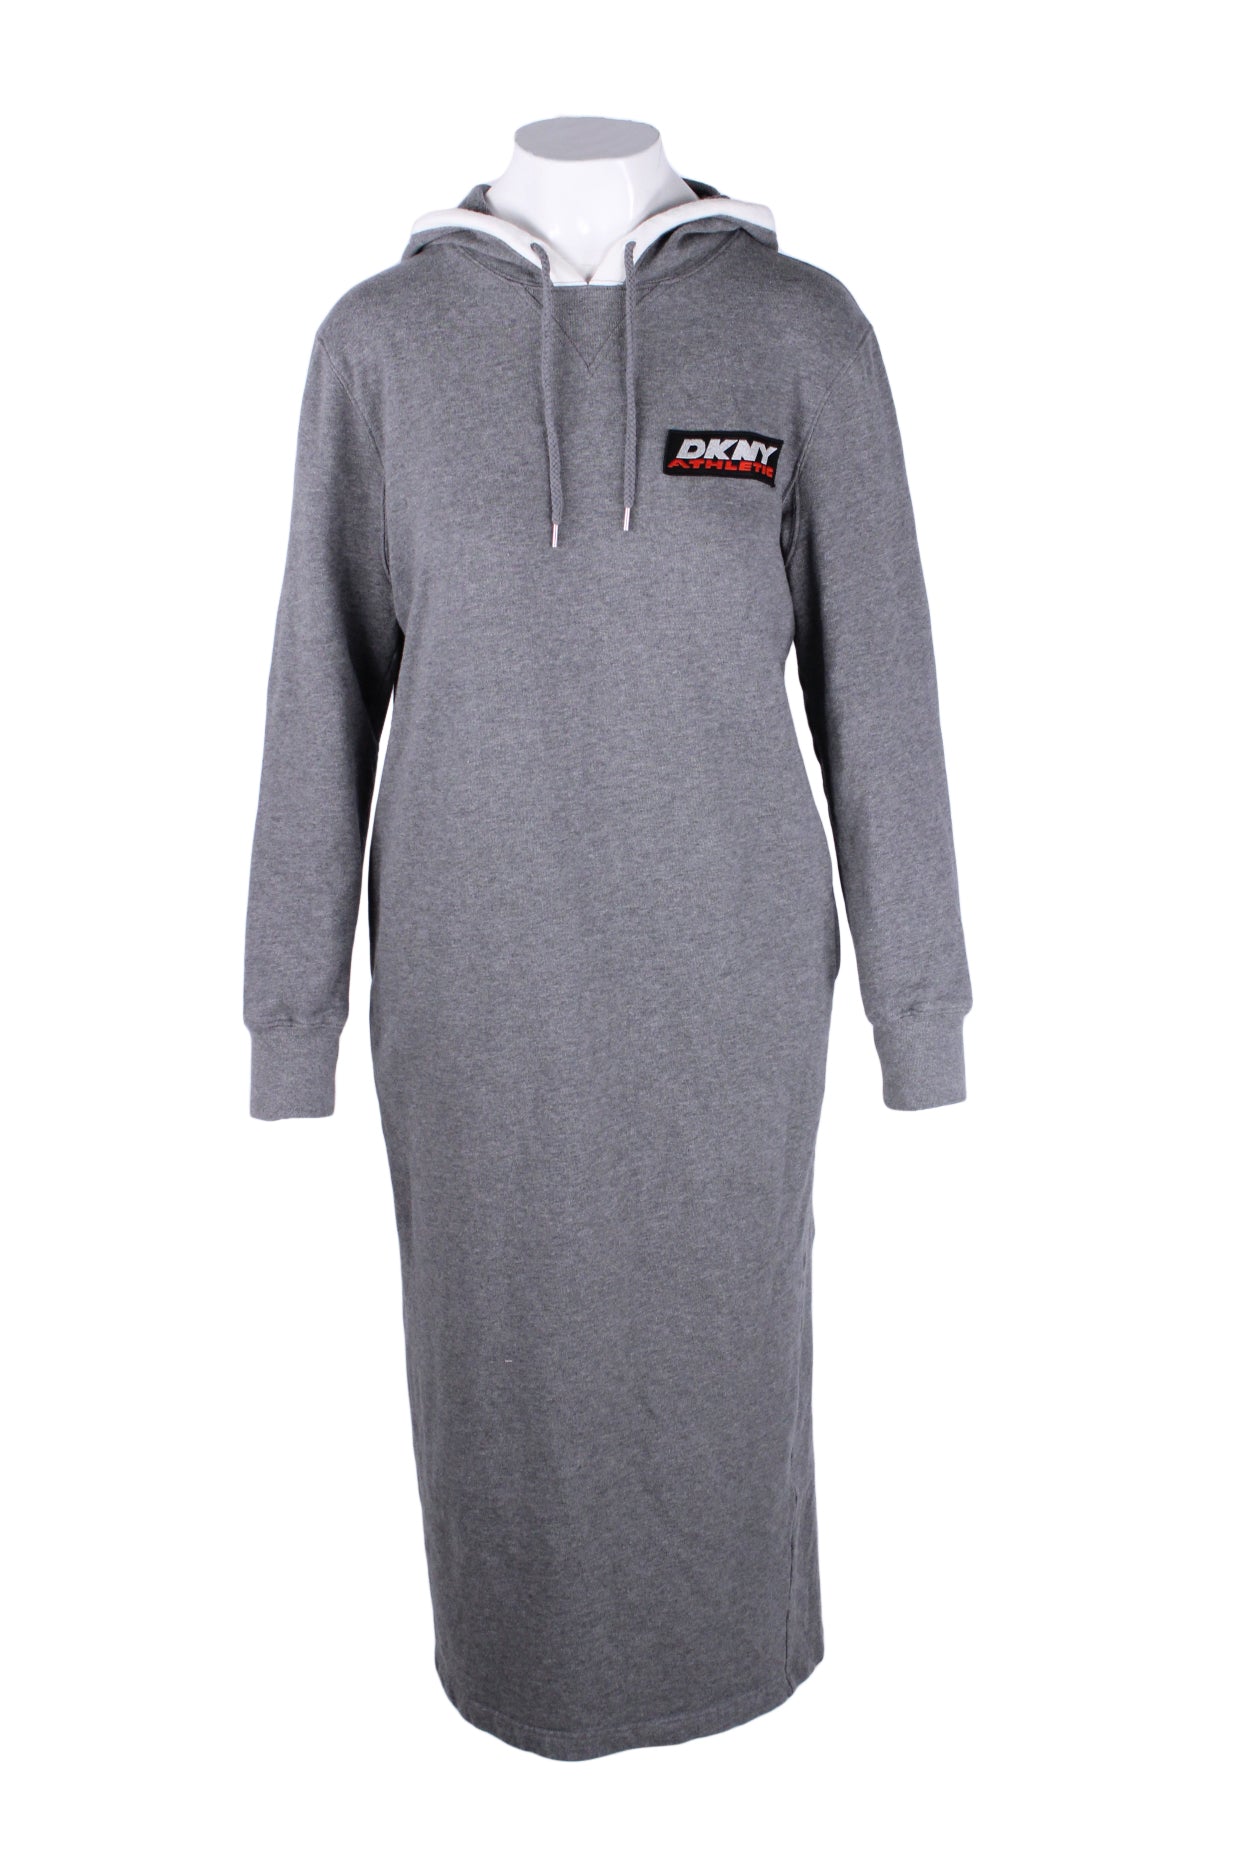 dkny x opening ceremony gray long sleeve dress. features a drawstring hood and pocket details.